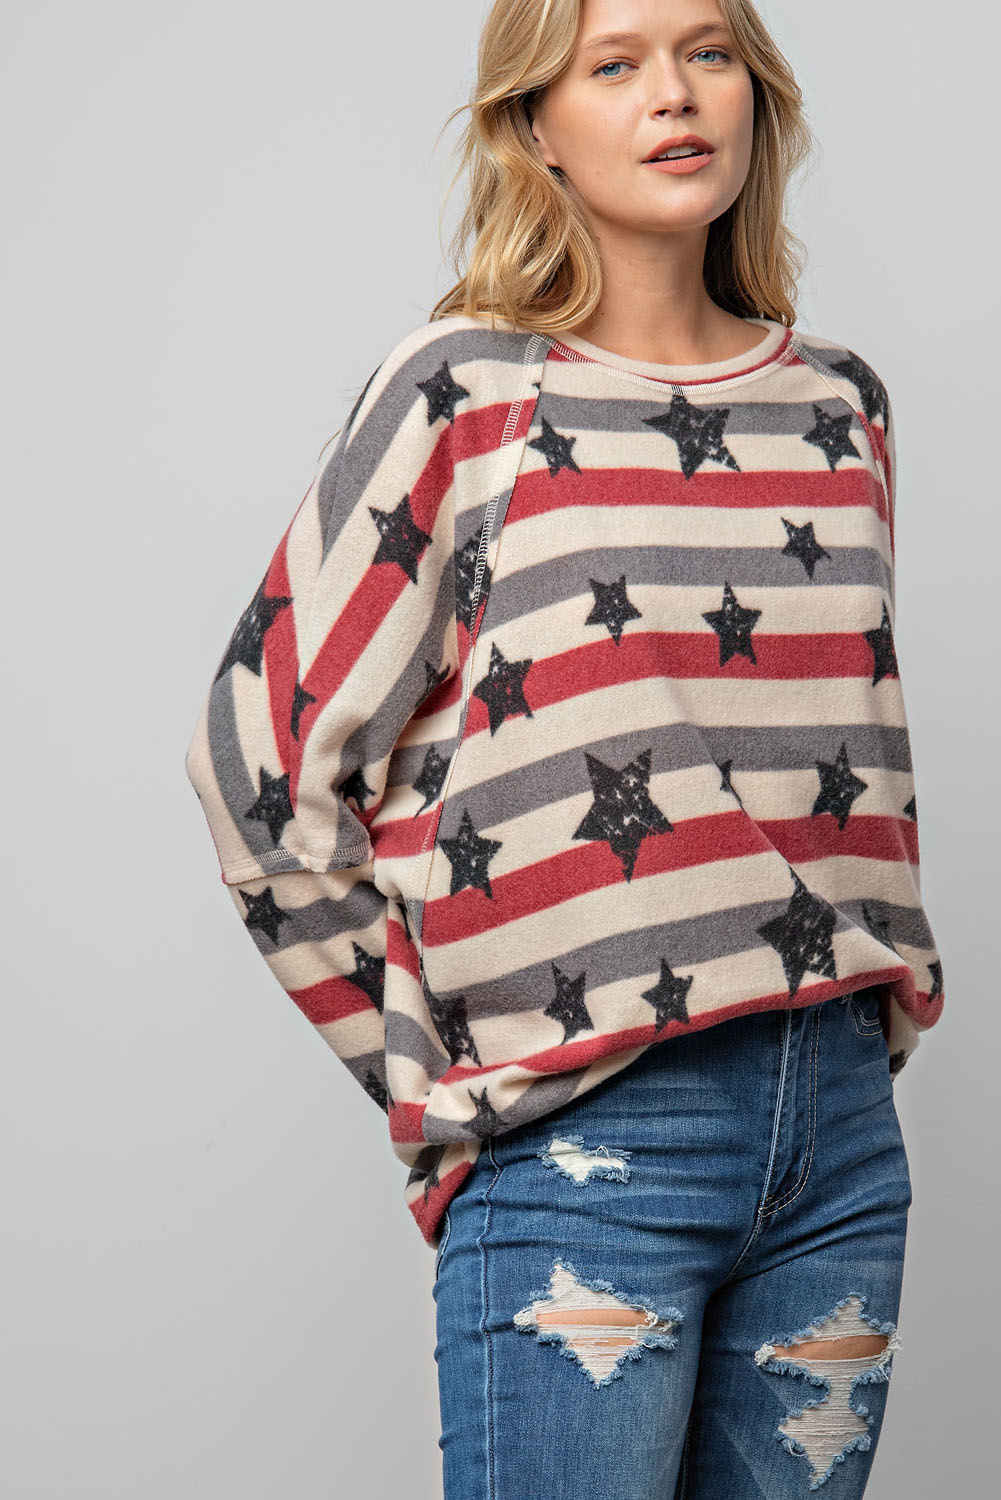 Americana Patriotic Brushed Knit Sweater